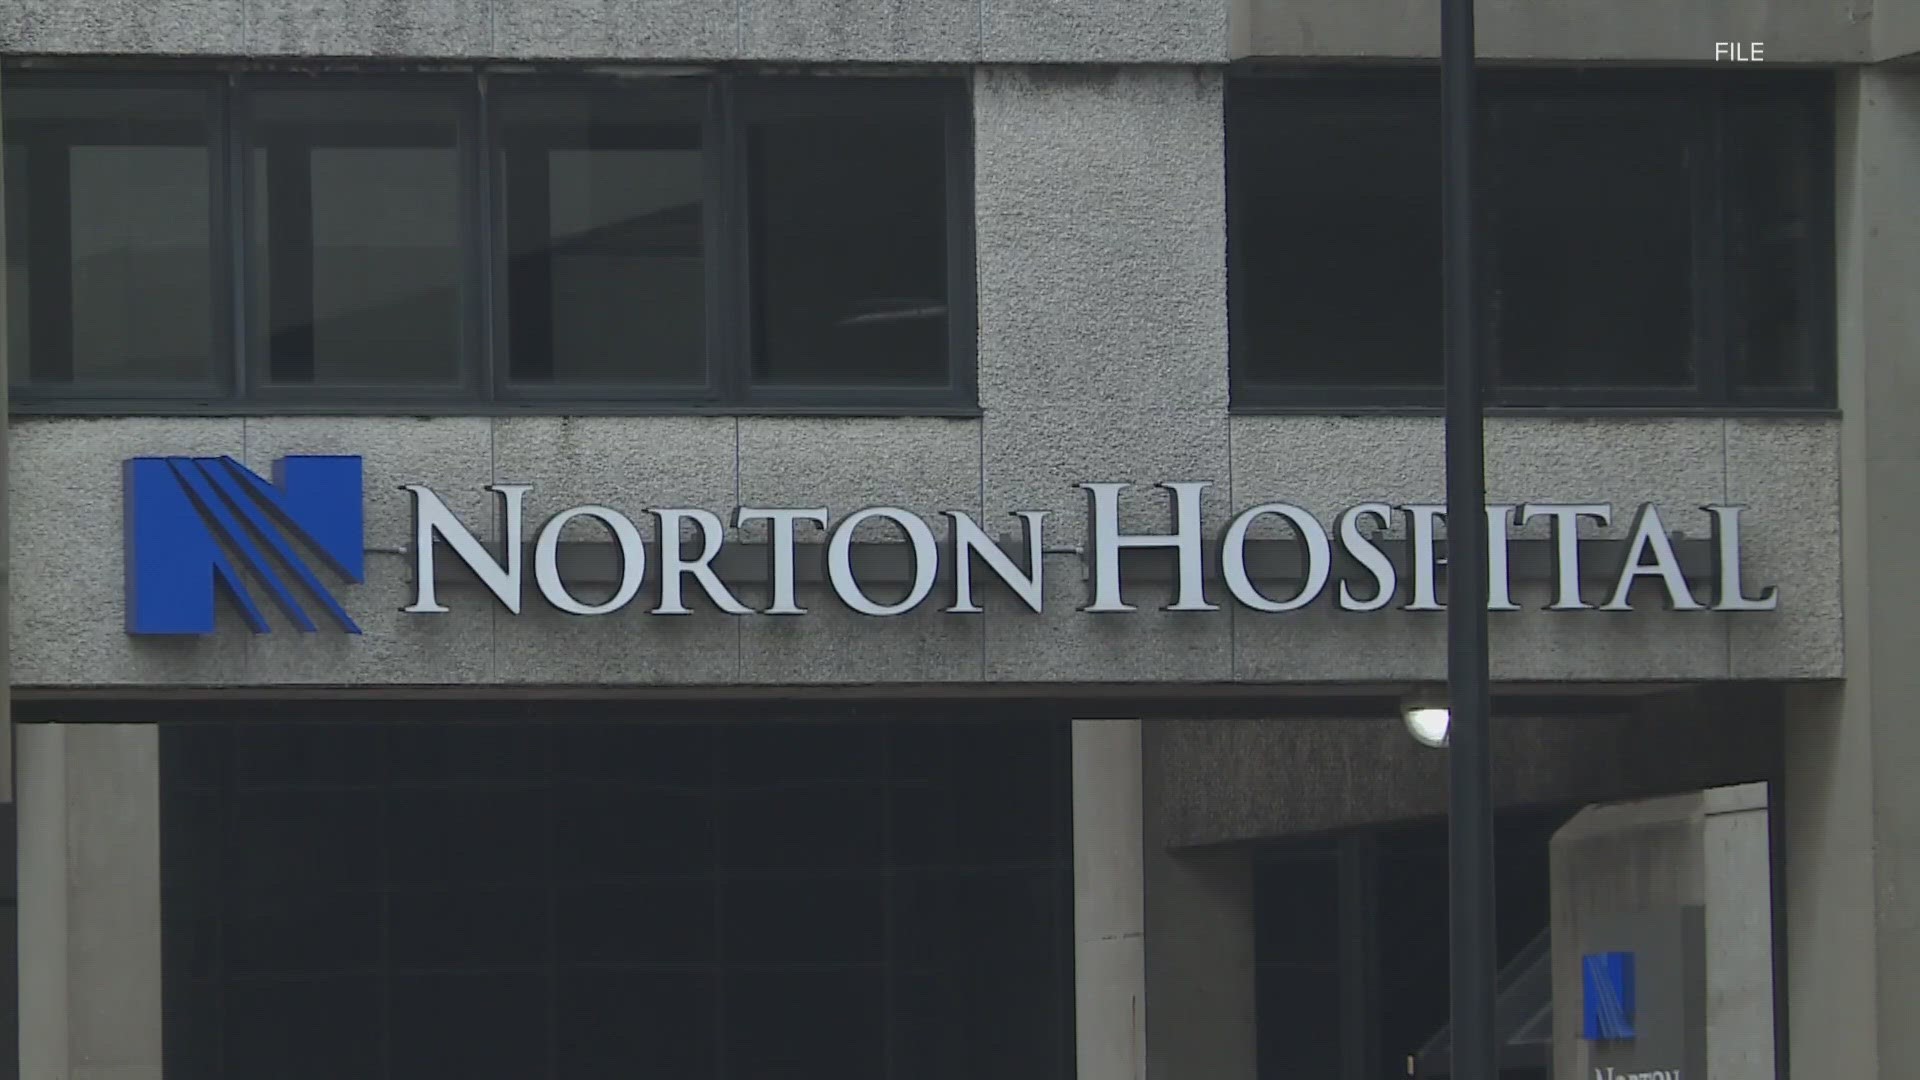 Norton Healthcare said surgeries have been rescheduled and online prescriptions were impacted.